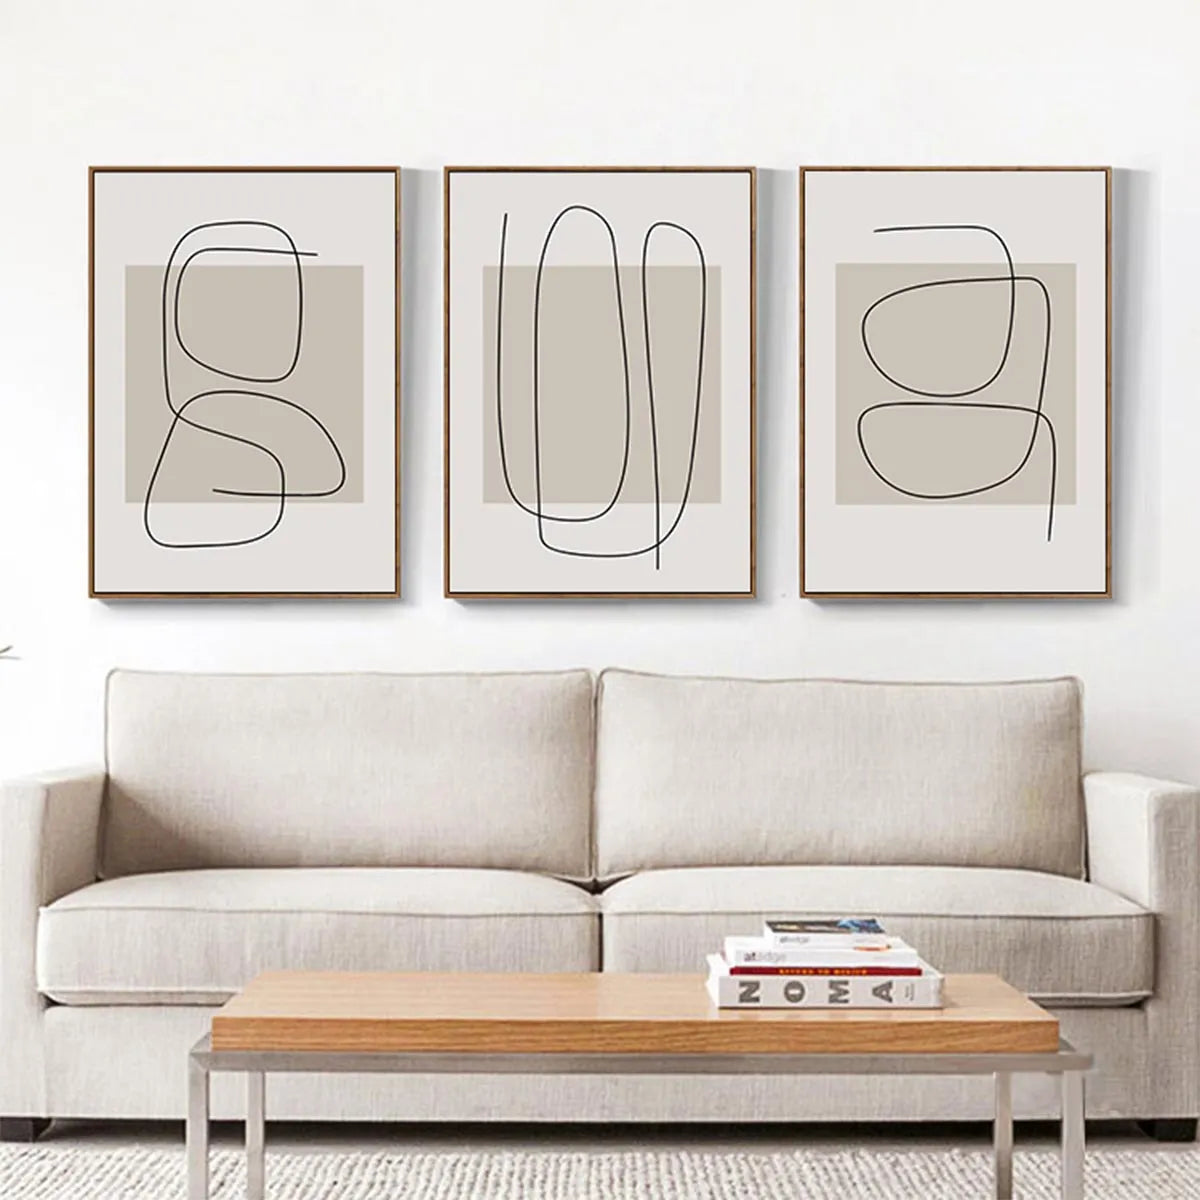 * Featured Sale * Set of 3Pcs Modern Minimalist Abstract Line Art Wall Art Fine Art Canvas Prints For Living Room Bedroom Home Office Art Decor